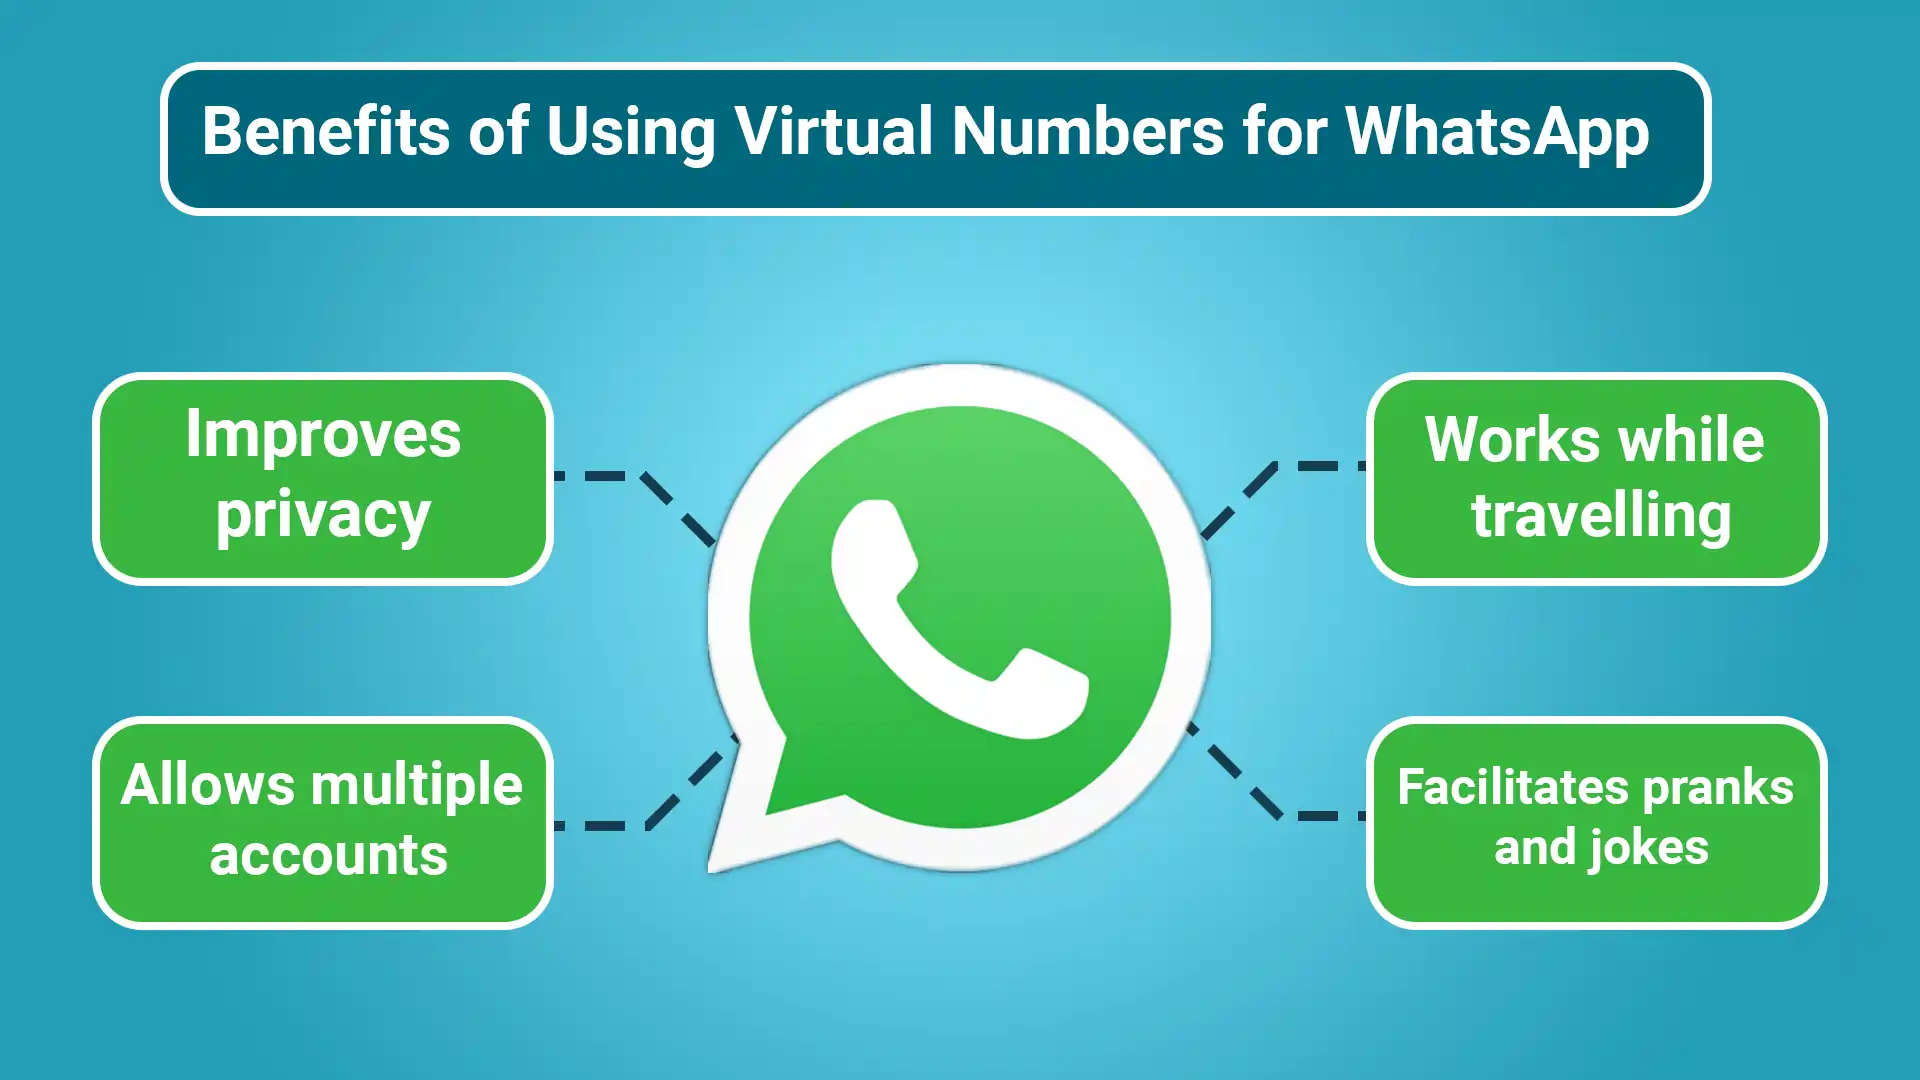 Benefits of Using Virtual Numbers for WhatsApp